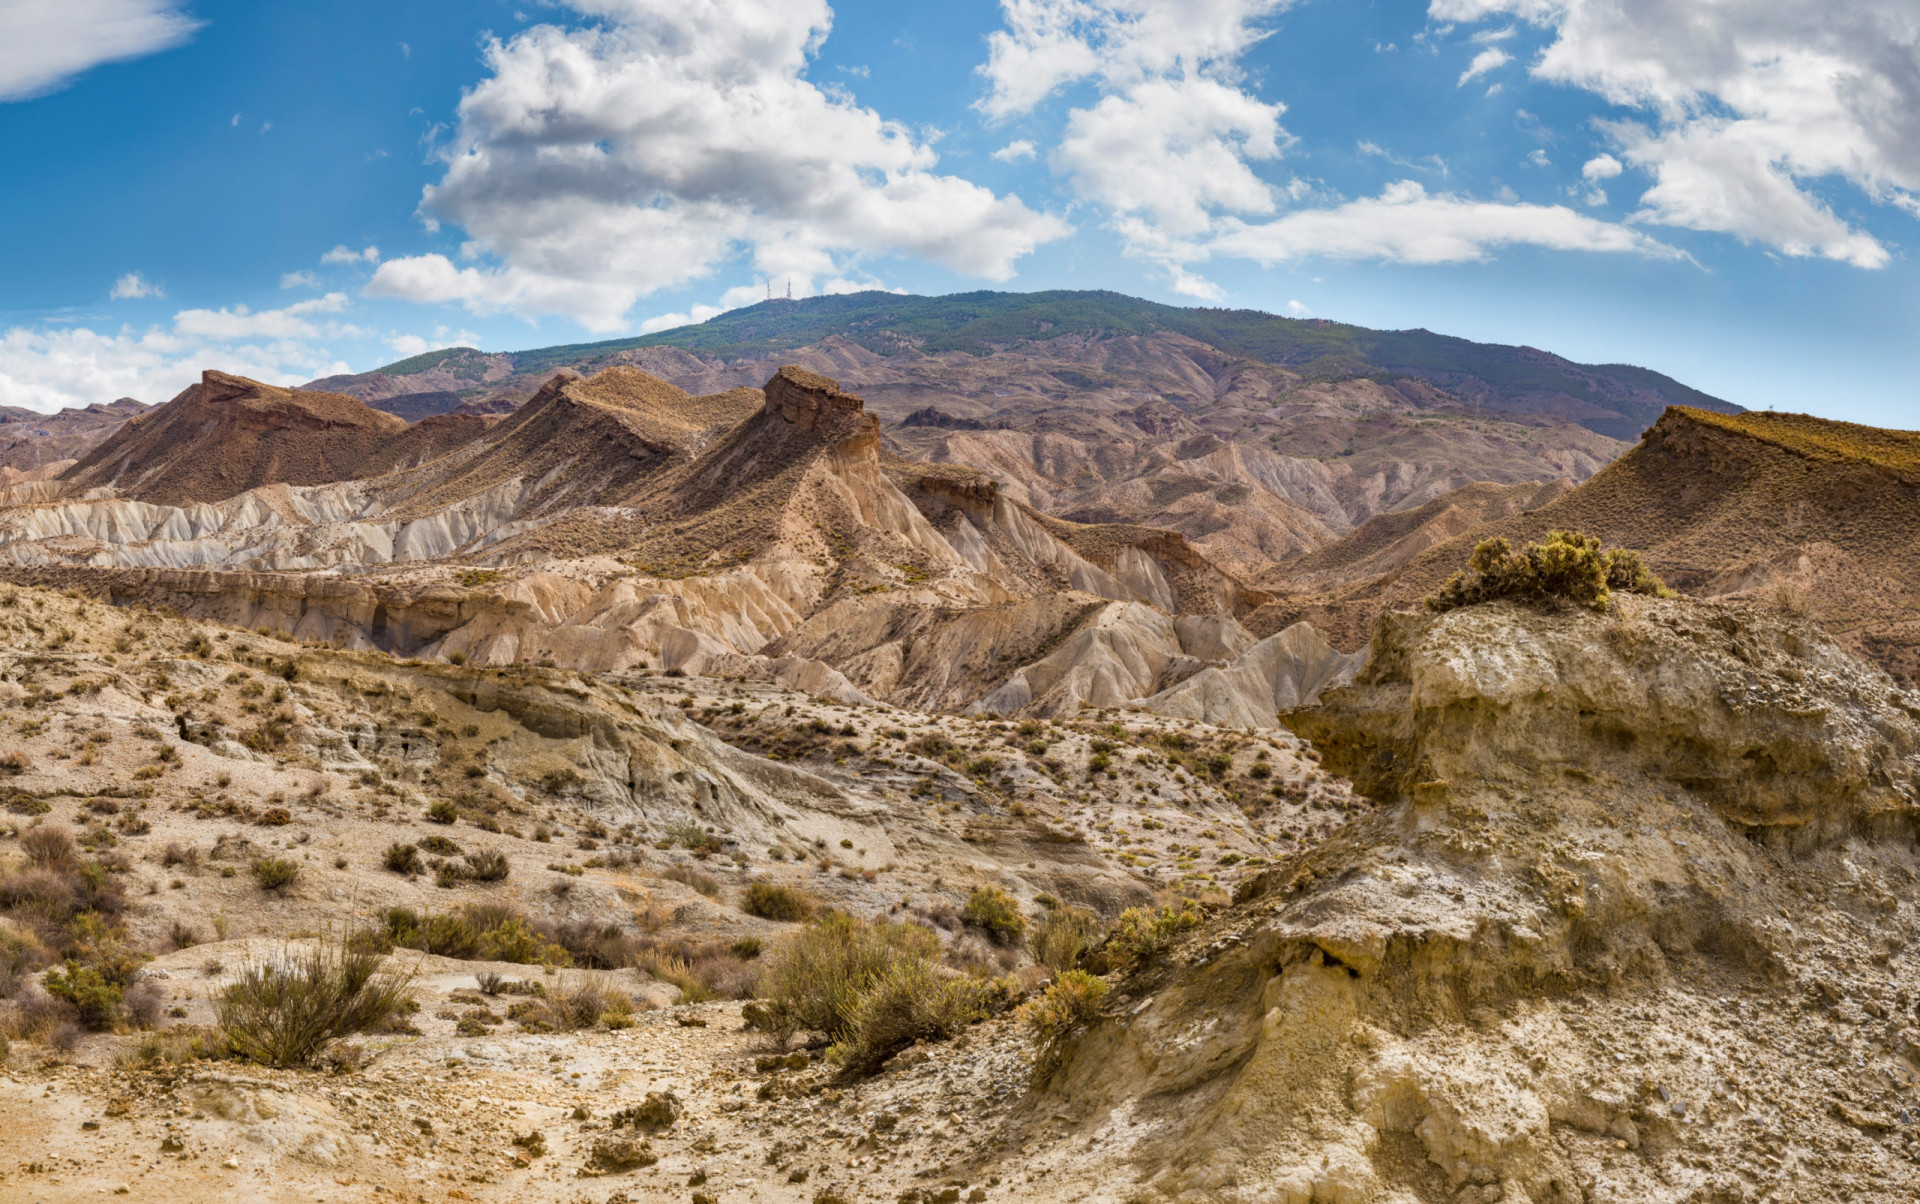 <p>The Tabernas Desert is located in the province of Almería in Andalusia, Spain.</p><p><a href="https://www.msn.com/en-us/community/channel/vid-7xx8mnucu55yw63we9va2gwr7uihbxwc68fxqp25x6tg4ftibpra?cvid=94631541bc0f4f89bfd59158d696ad7e">Follow us and access great exclusive content every day</a></p>